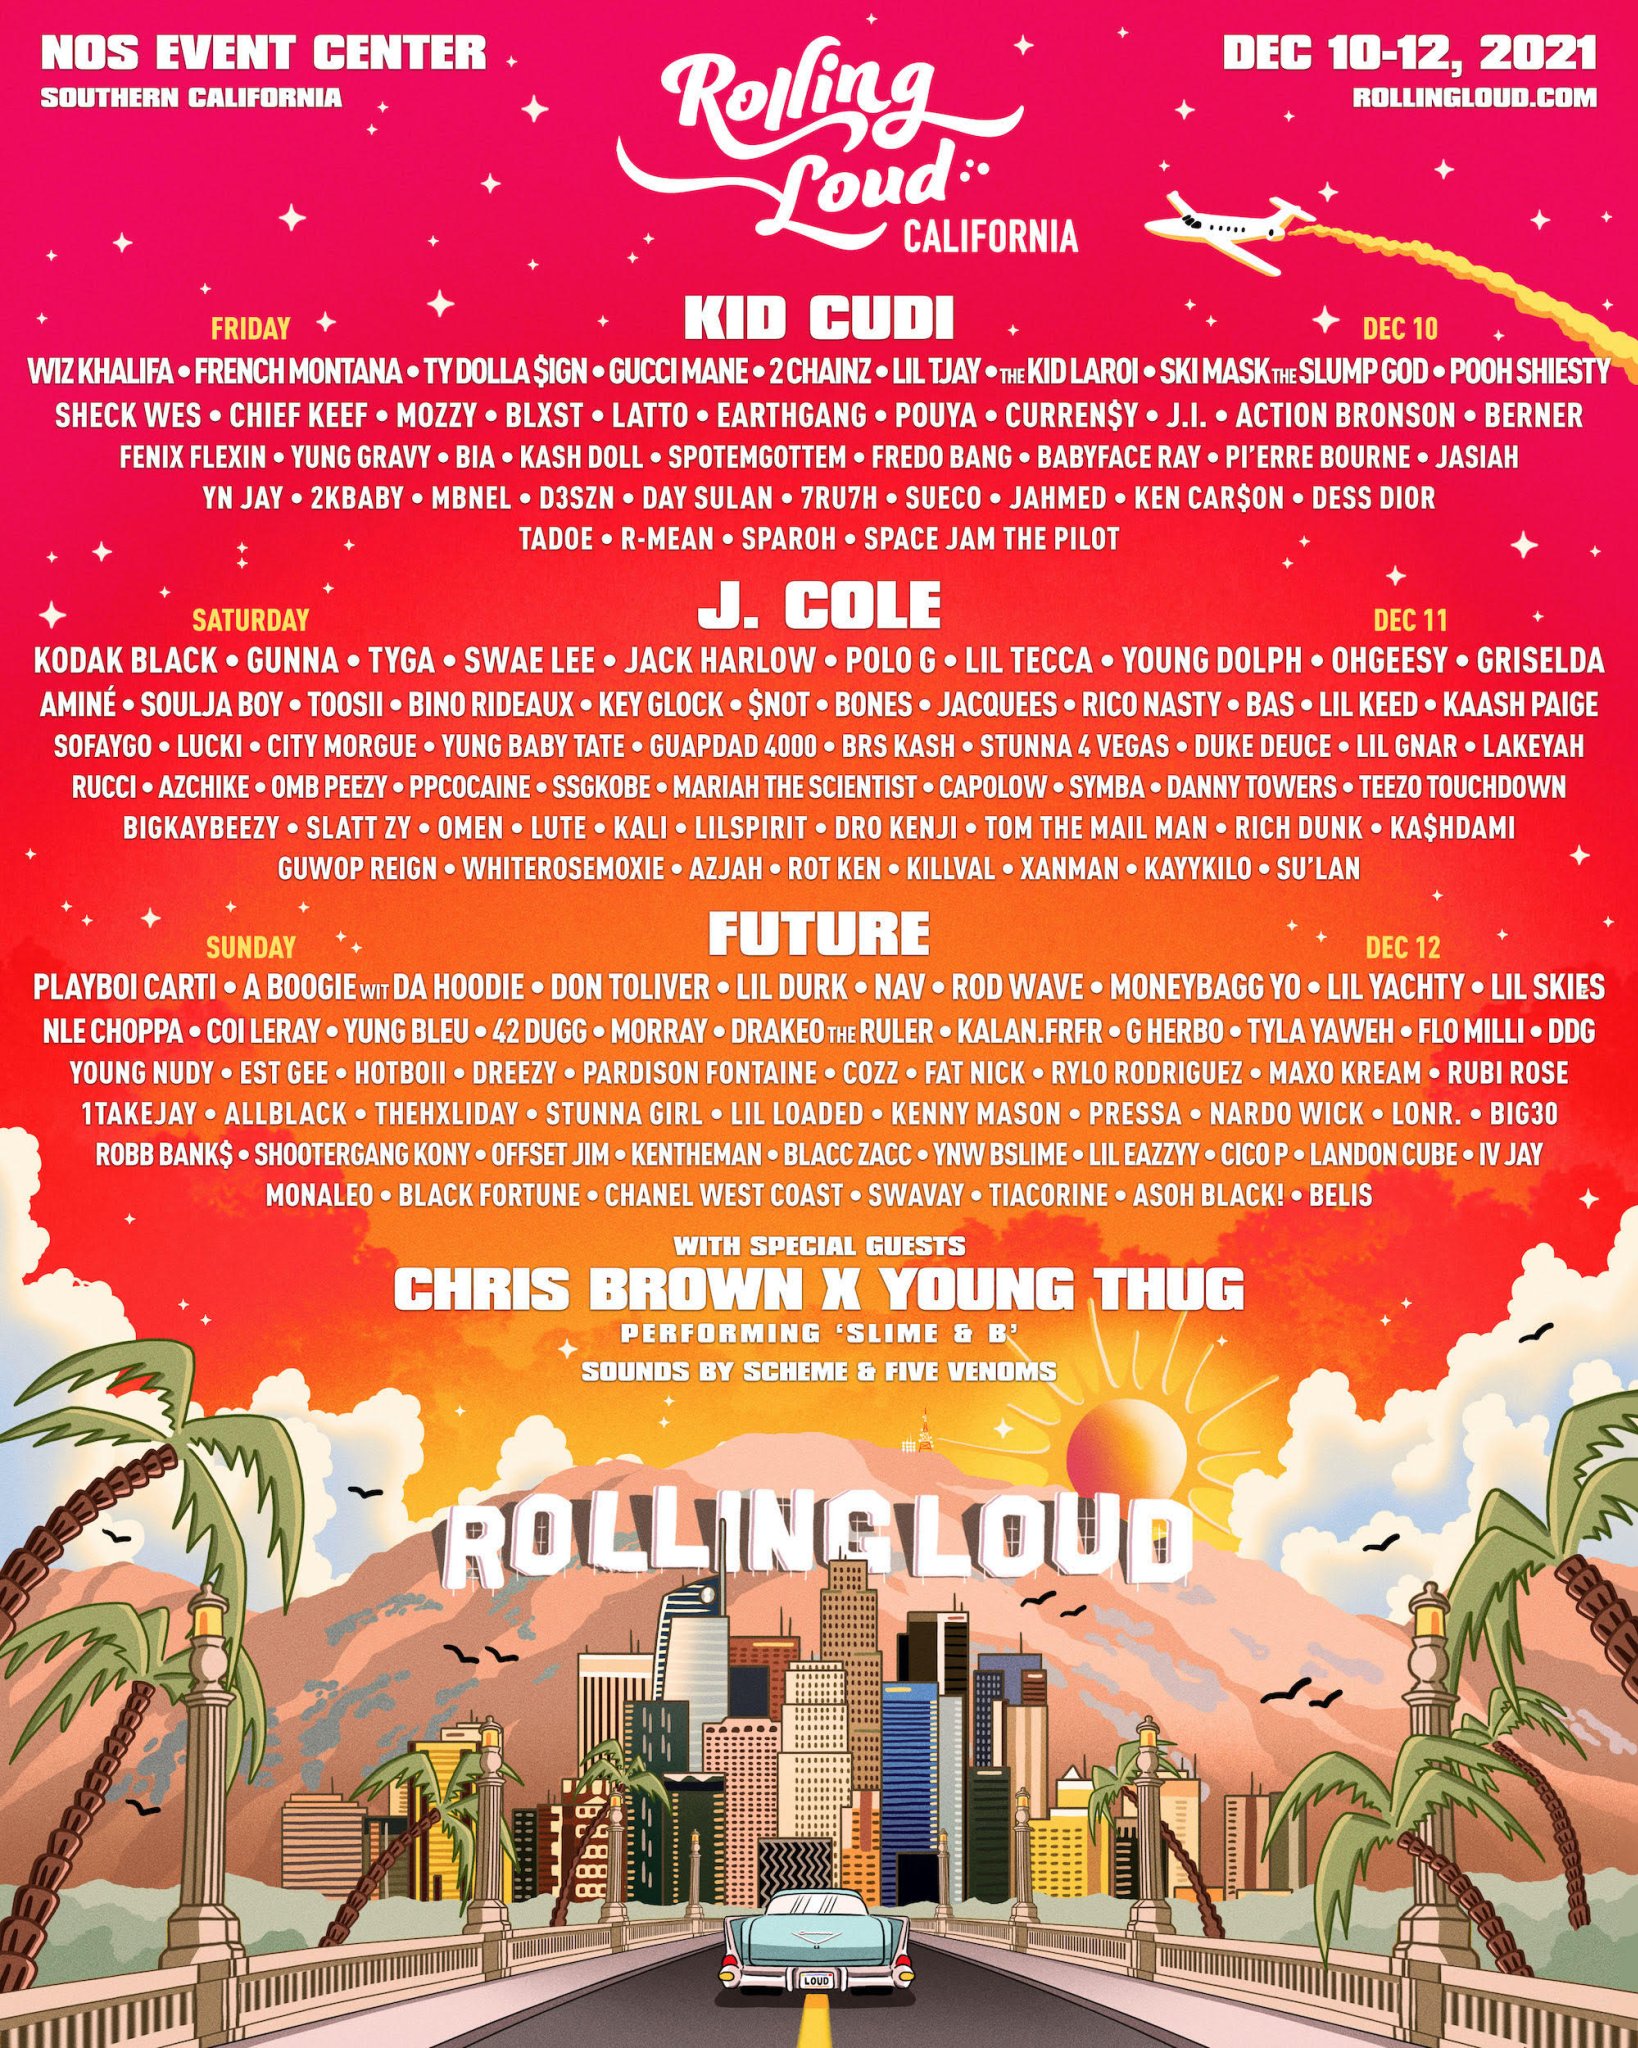 Rolling Loud California Lineup Features Kid Cudi, J Cole, Future, Jack Harlow, Wiz Khalifa, Gucci Mane and So Many More